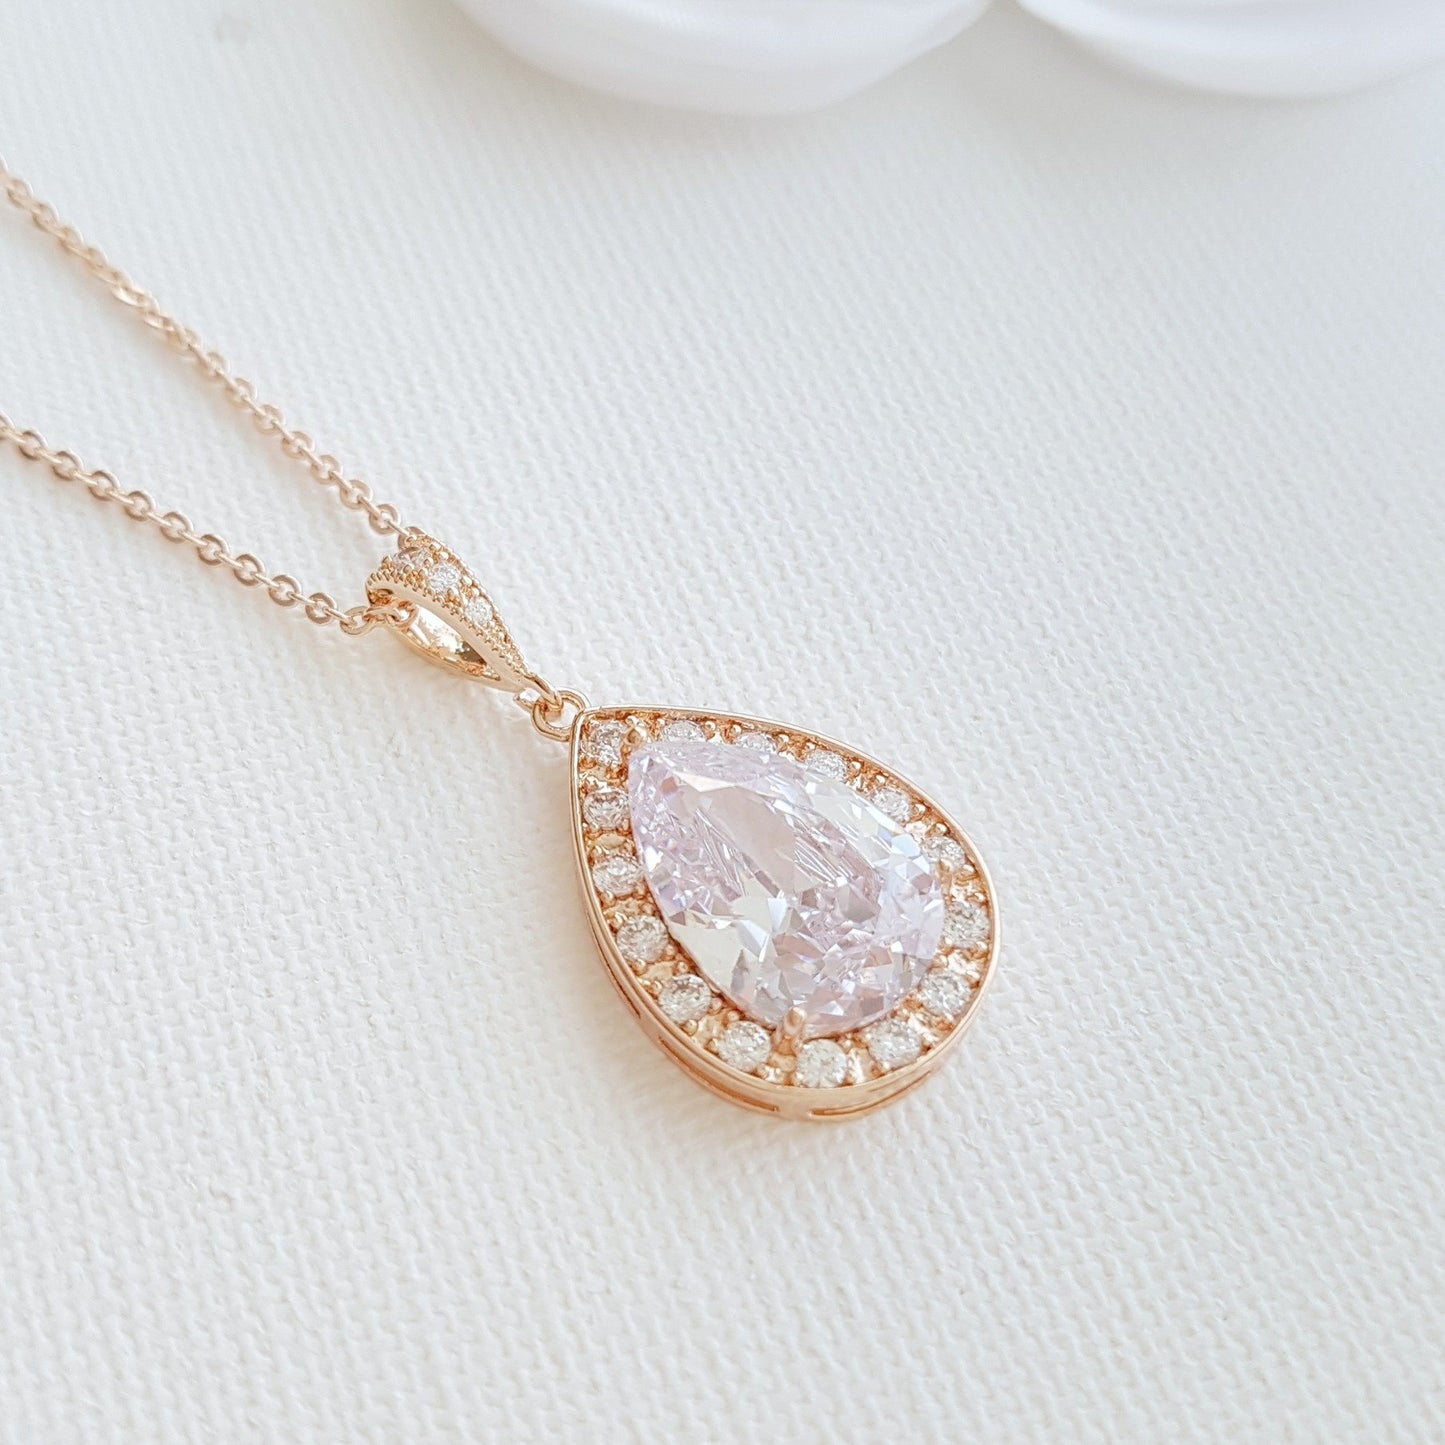 Teardrop Necklace in 14K Gold & Cubic Zirconia for Brides & Bridesmaids-Evelyn